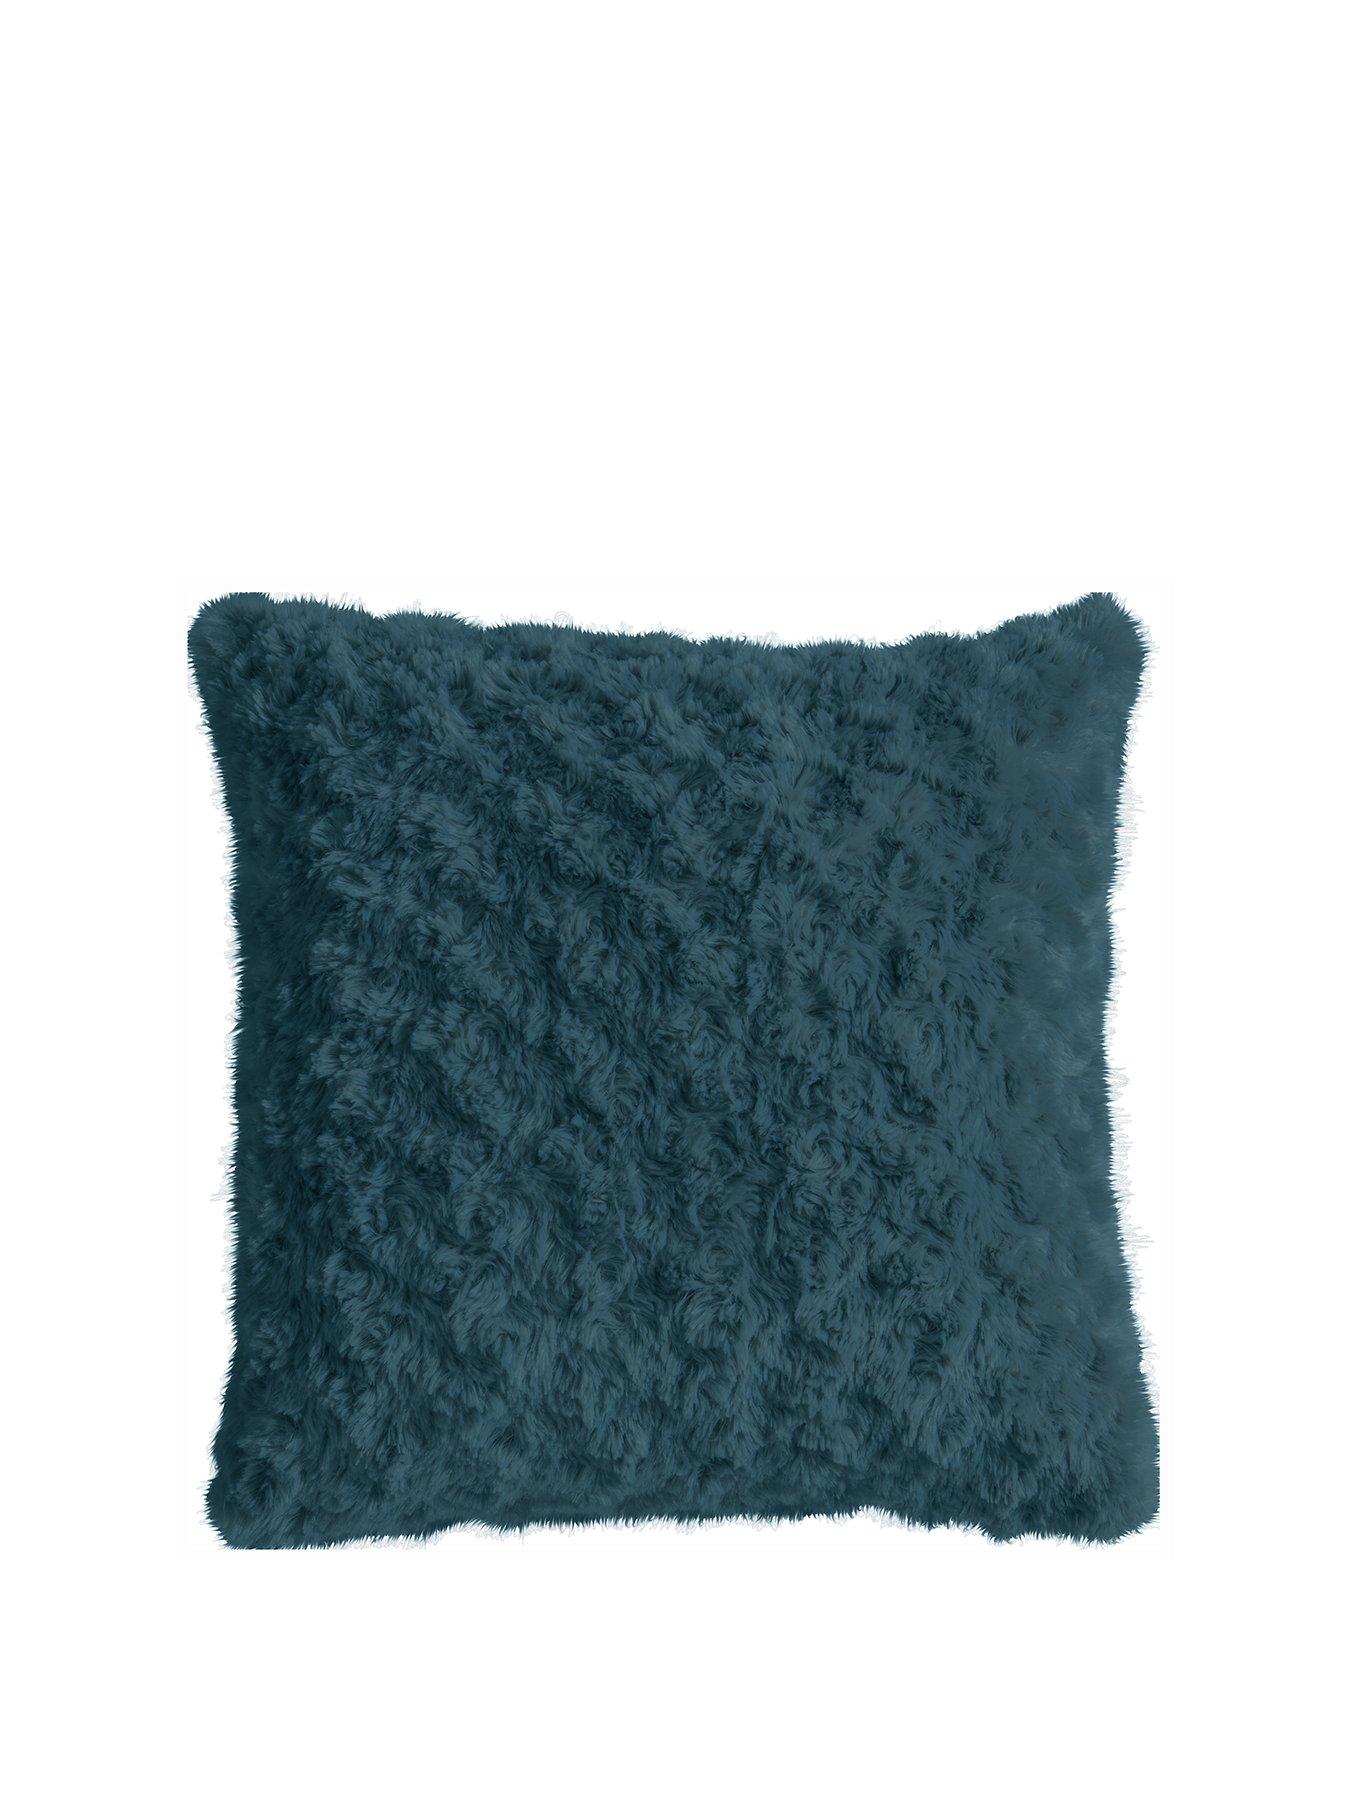 matching cushions and throws uk